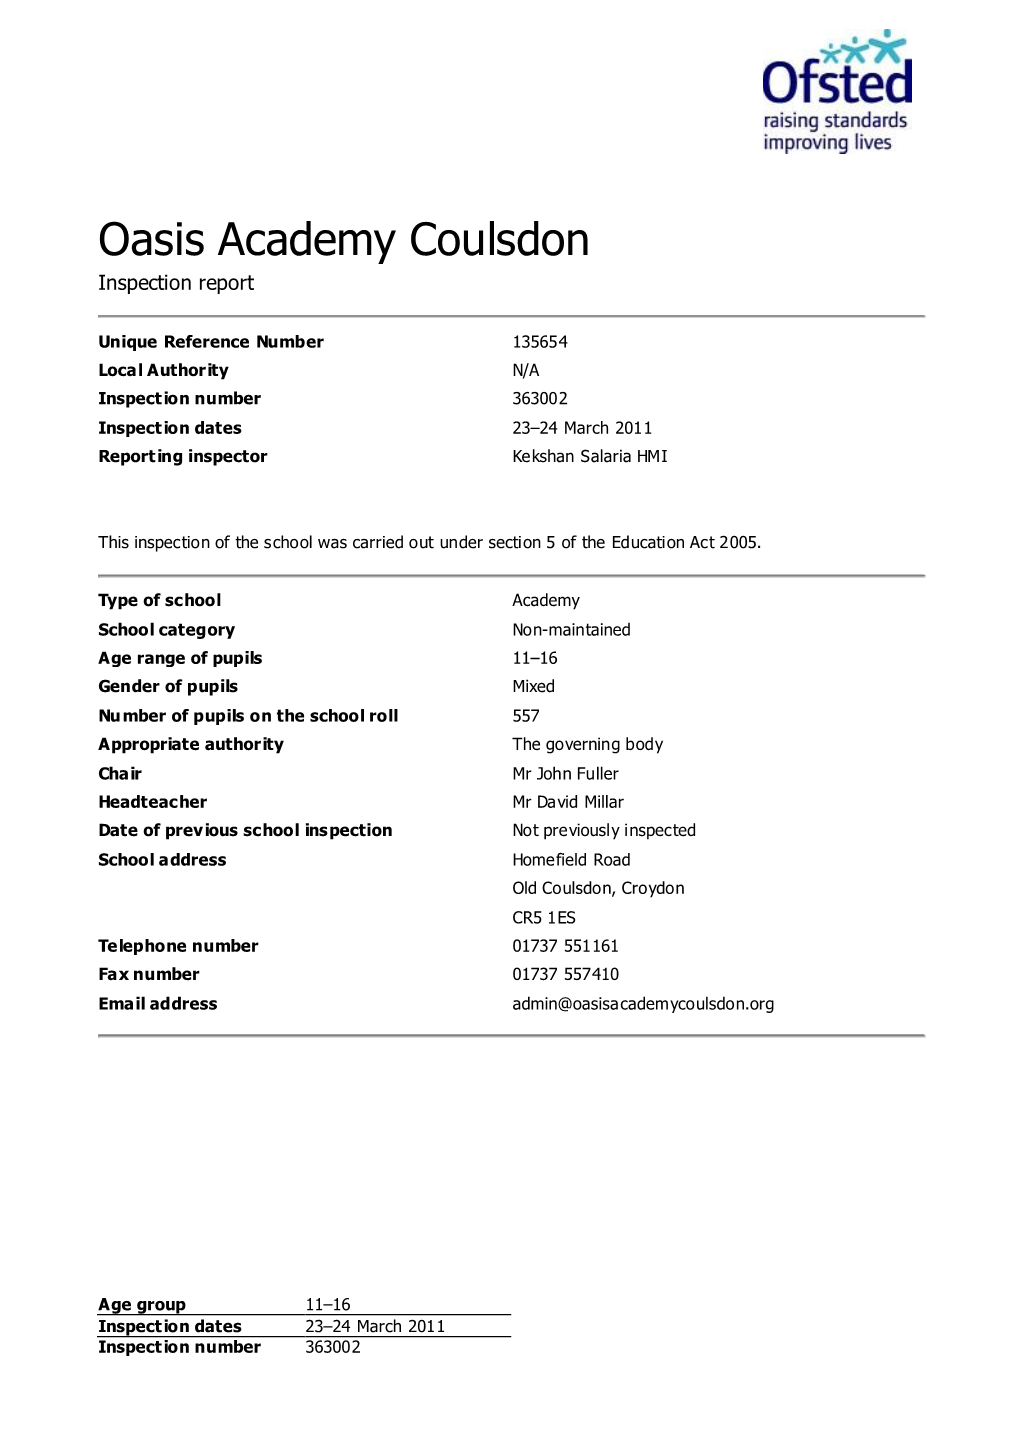 Oasis Academy Coulsdon Inspection Report